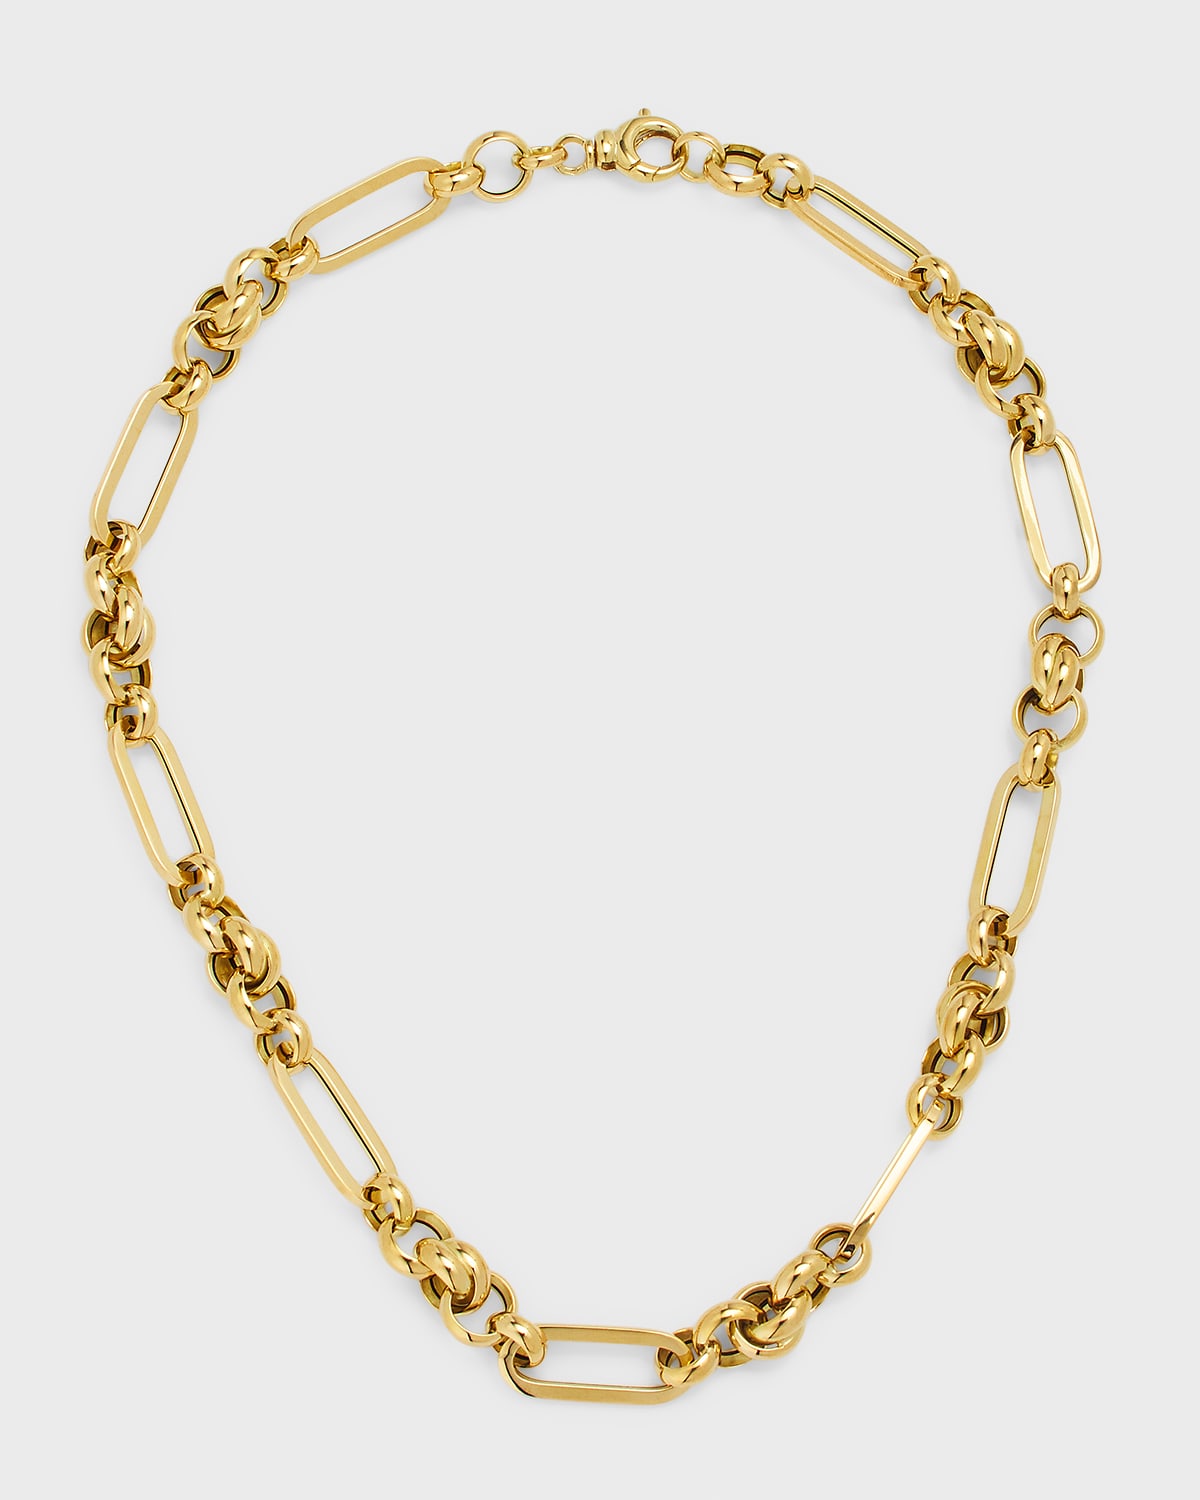 18K Gold Snake Chain Necklace, 6mm, 18"L